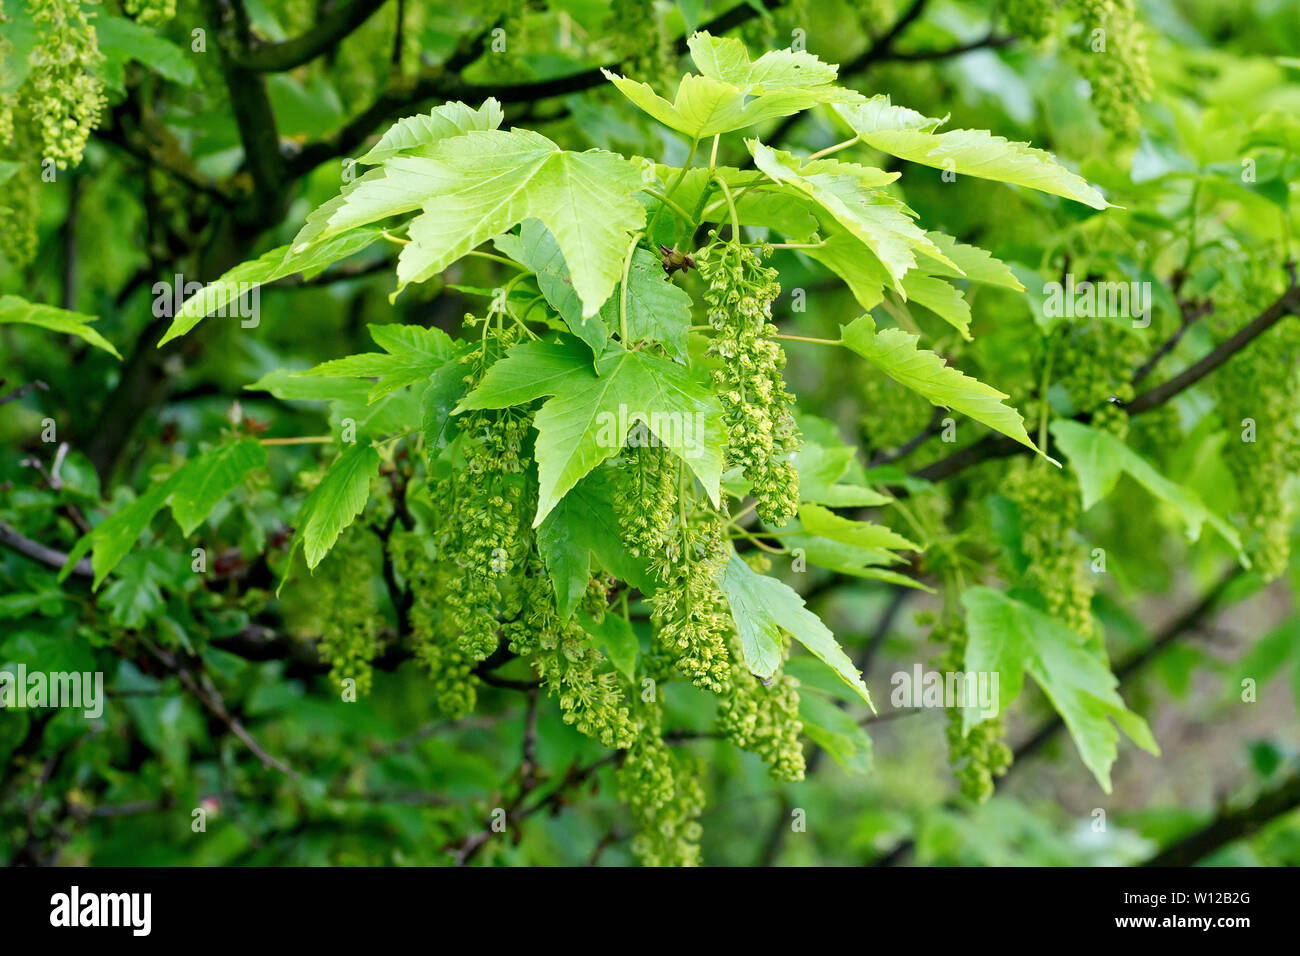 Sycamore (acer pseudoplatanus), close up showing the flowers and leaves on the tree in spring. Stock Photo